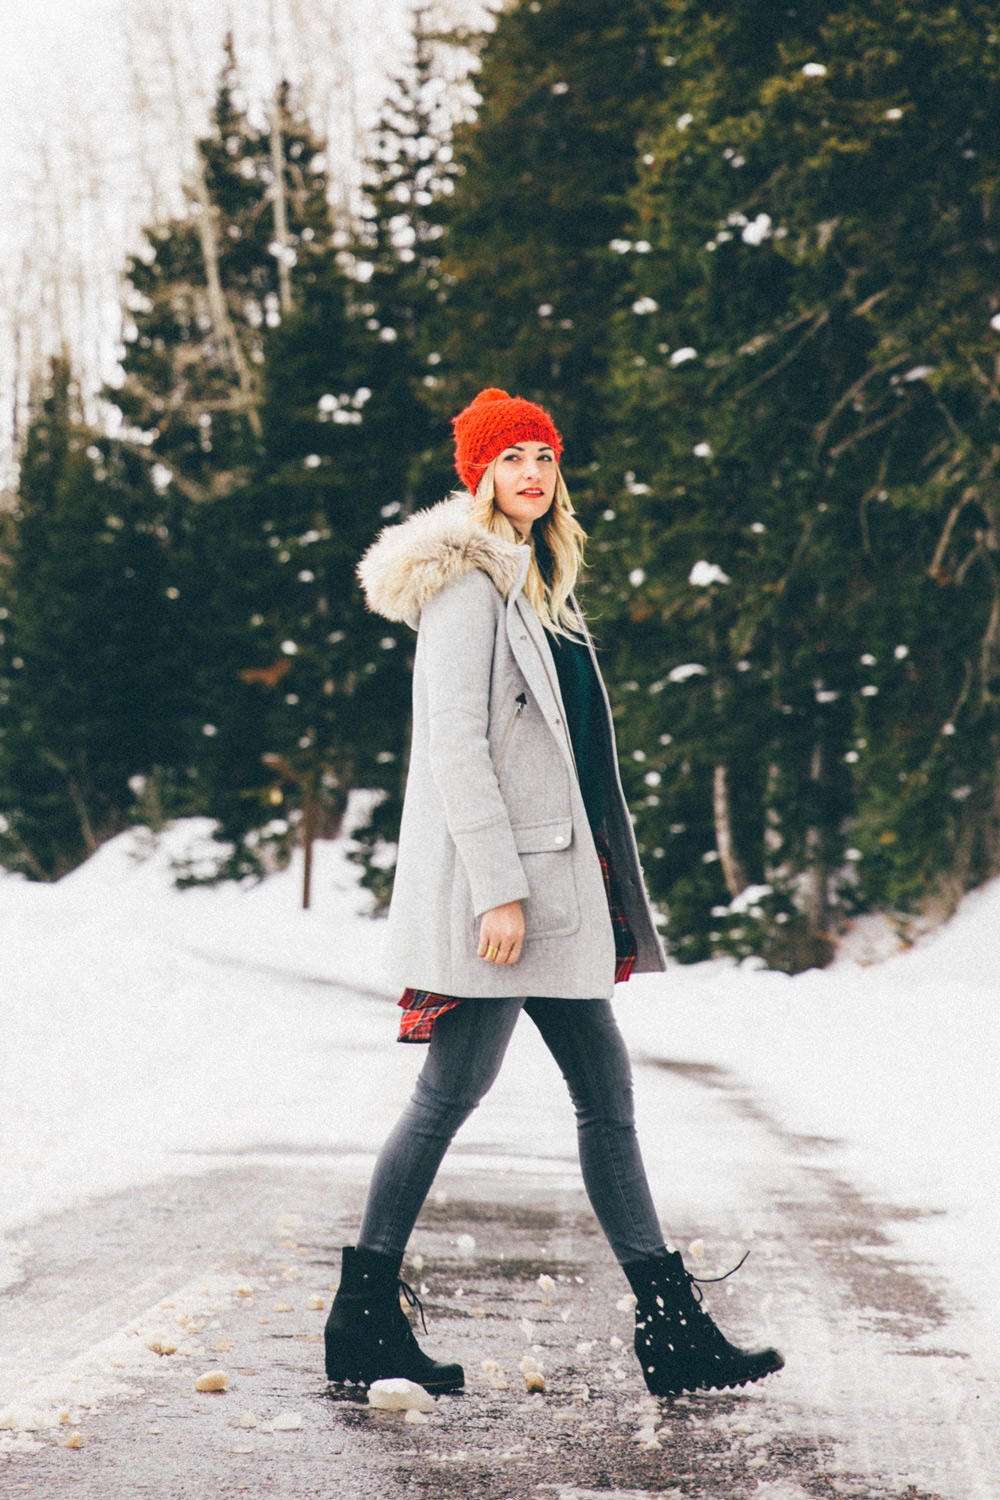 https://www.thedashofdarling.com/wp-content/uploads/2017/02/dash-of-darling-red-beanie-grey-coat-winter-outfit.jpg